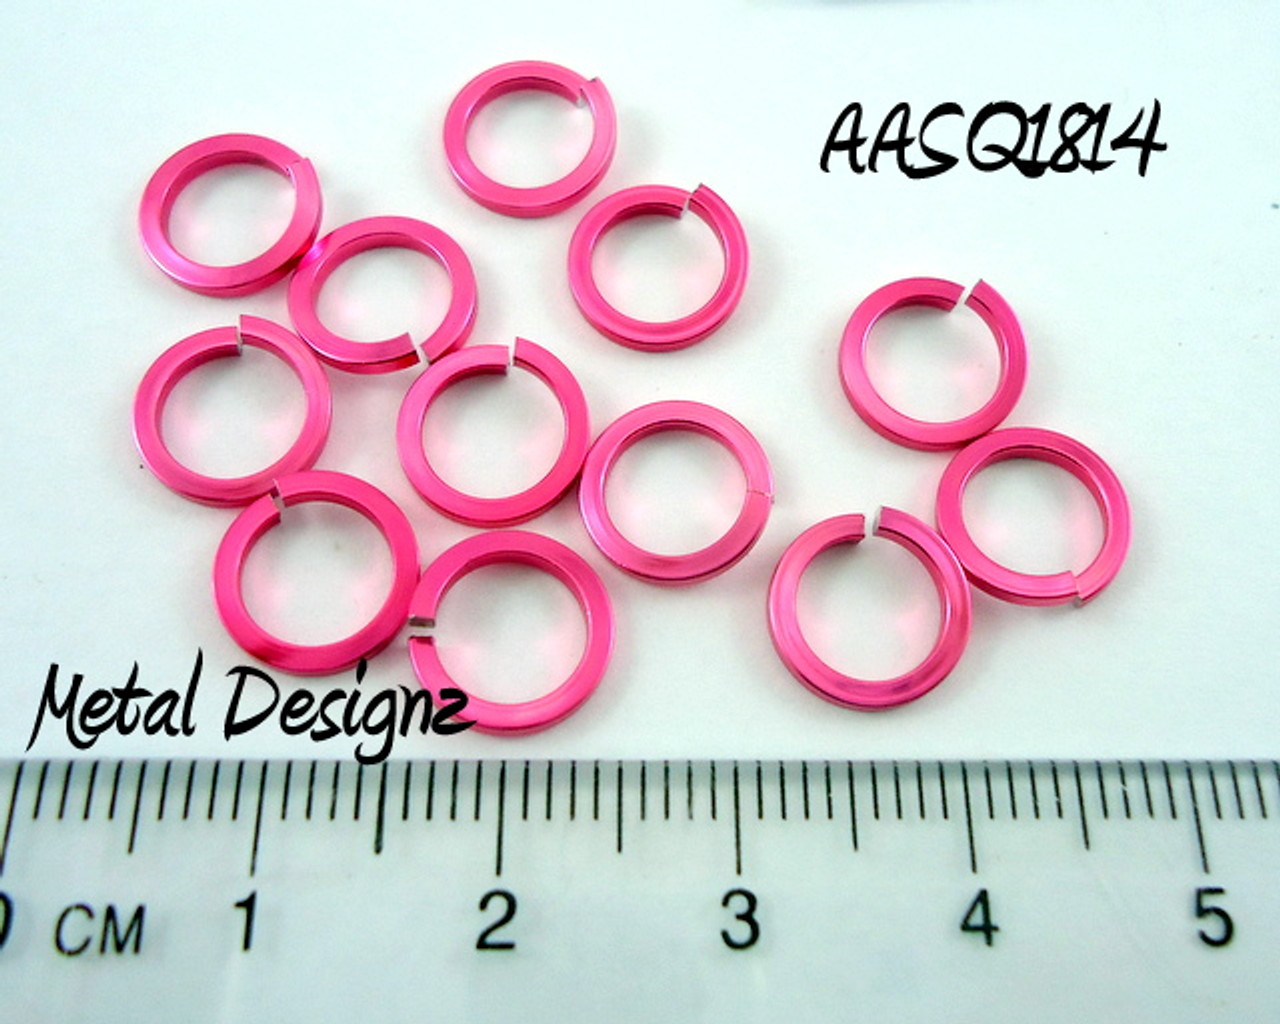 Chainmail Joe 1/2 Pound Cosmic Pink Anodized Aluminum Jump Rings 18G 1/4  ID (3200+ Rings)